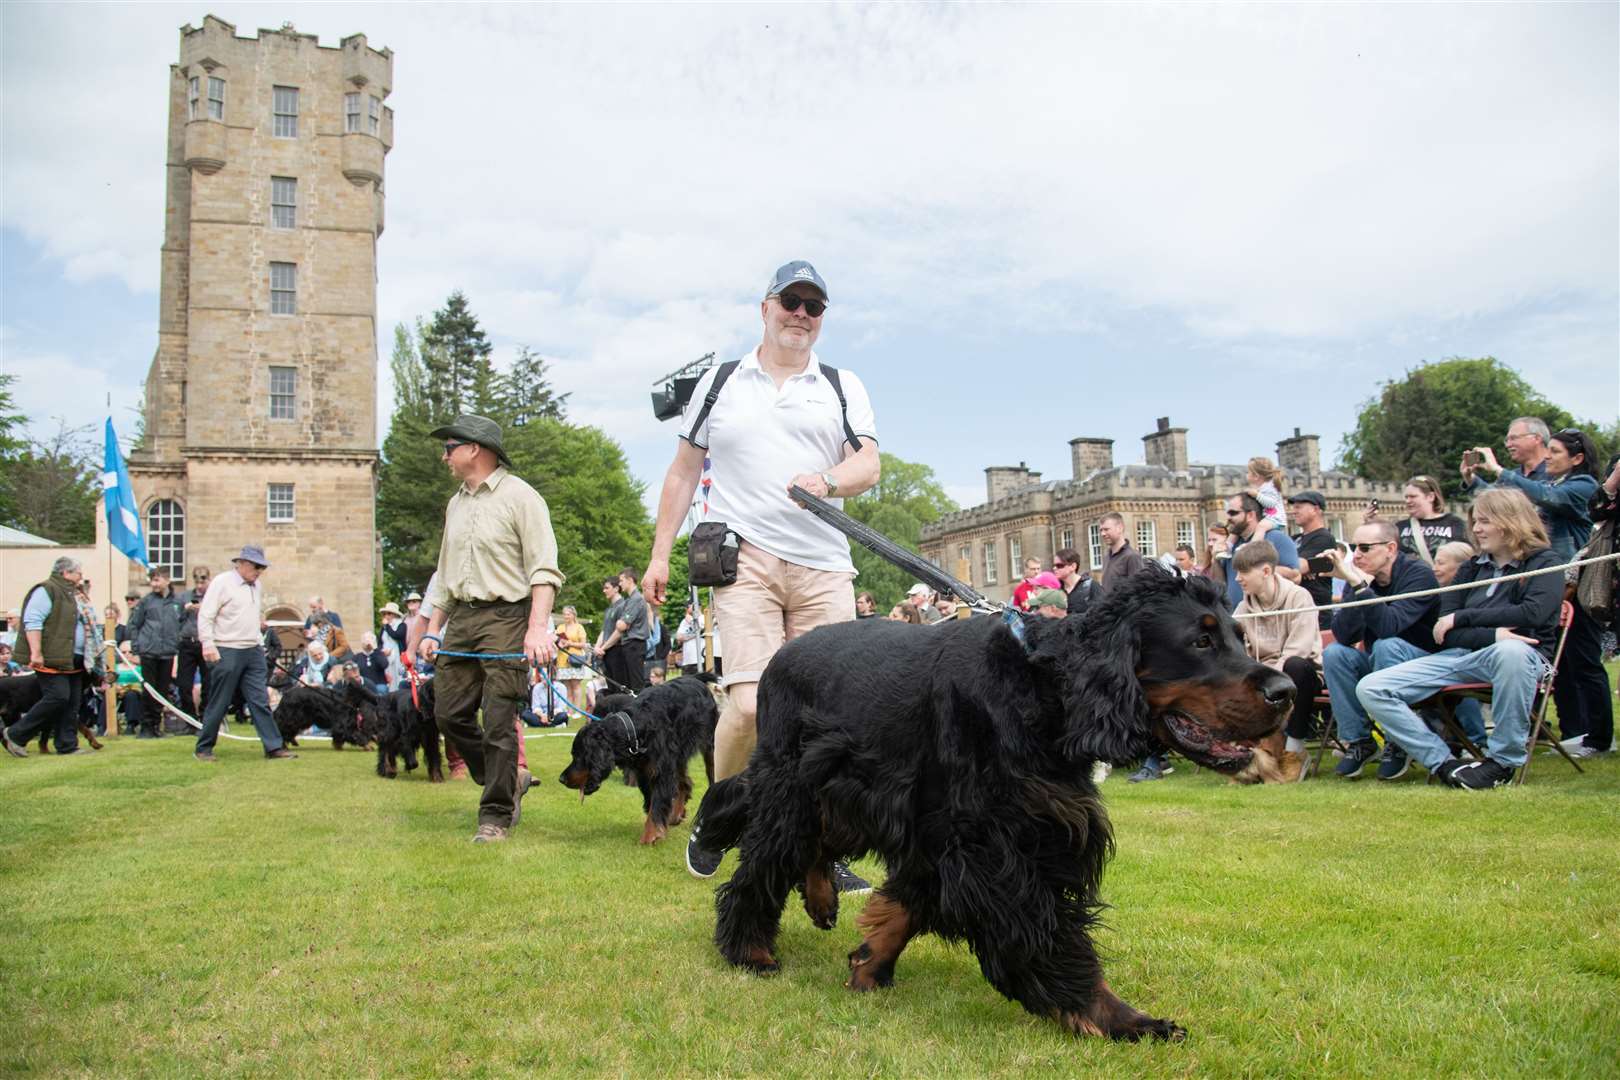 The Gordon Setters were just some of the four legged friends at Fochabers. Picture: Daniel Forsyth